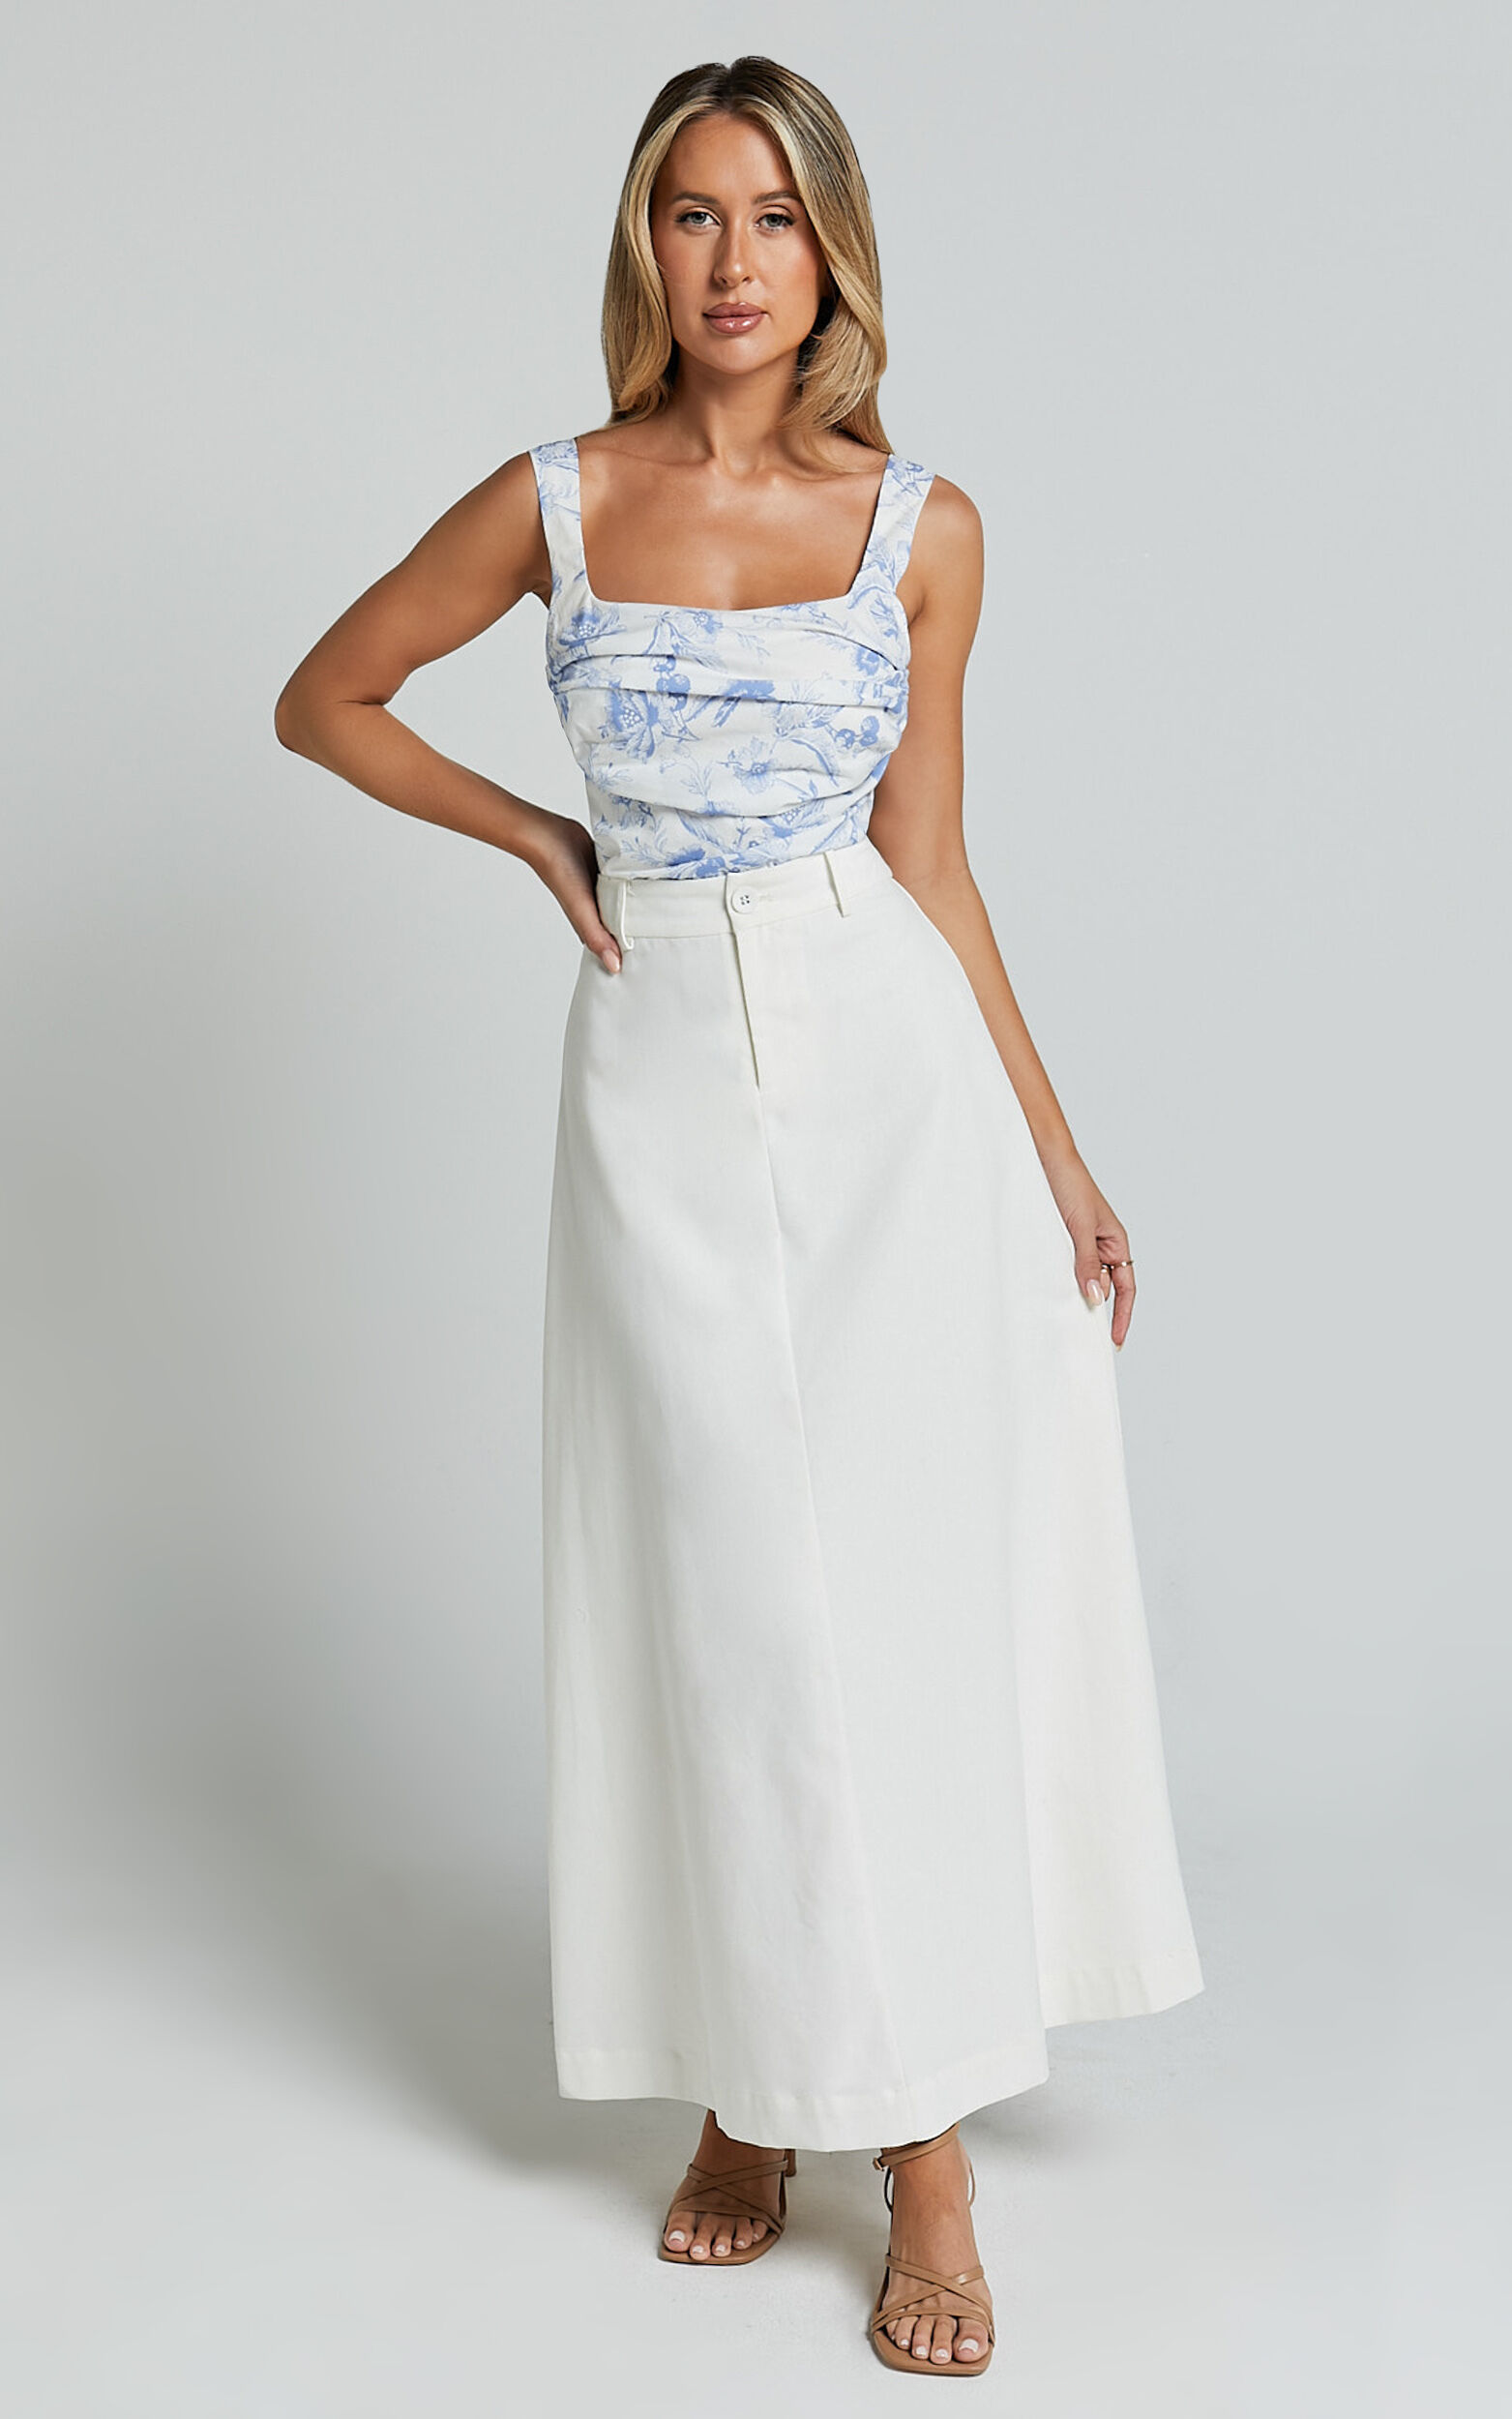 Dresden Top - Square Neck Ruched Bodice Corset Top in White and Blue Floral